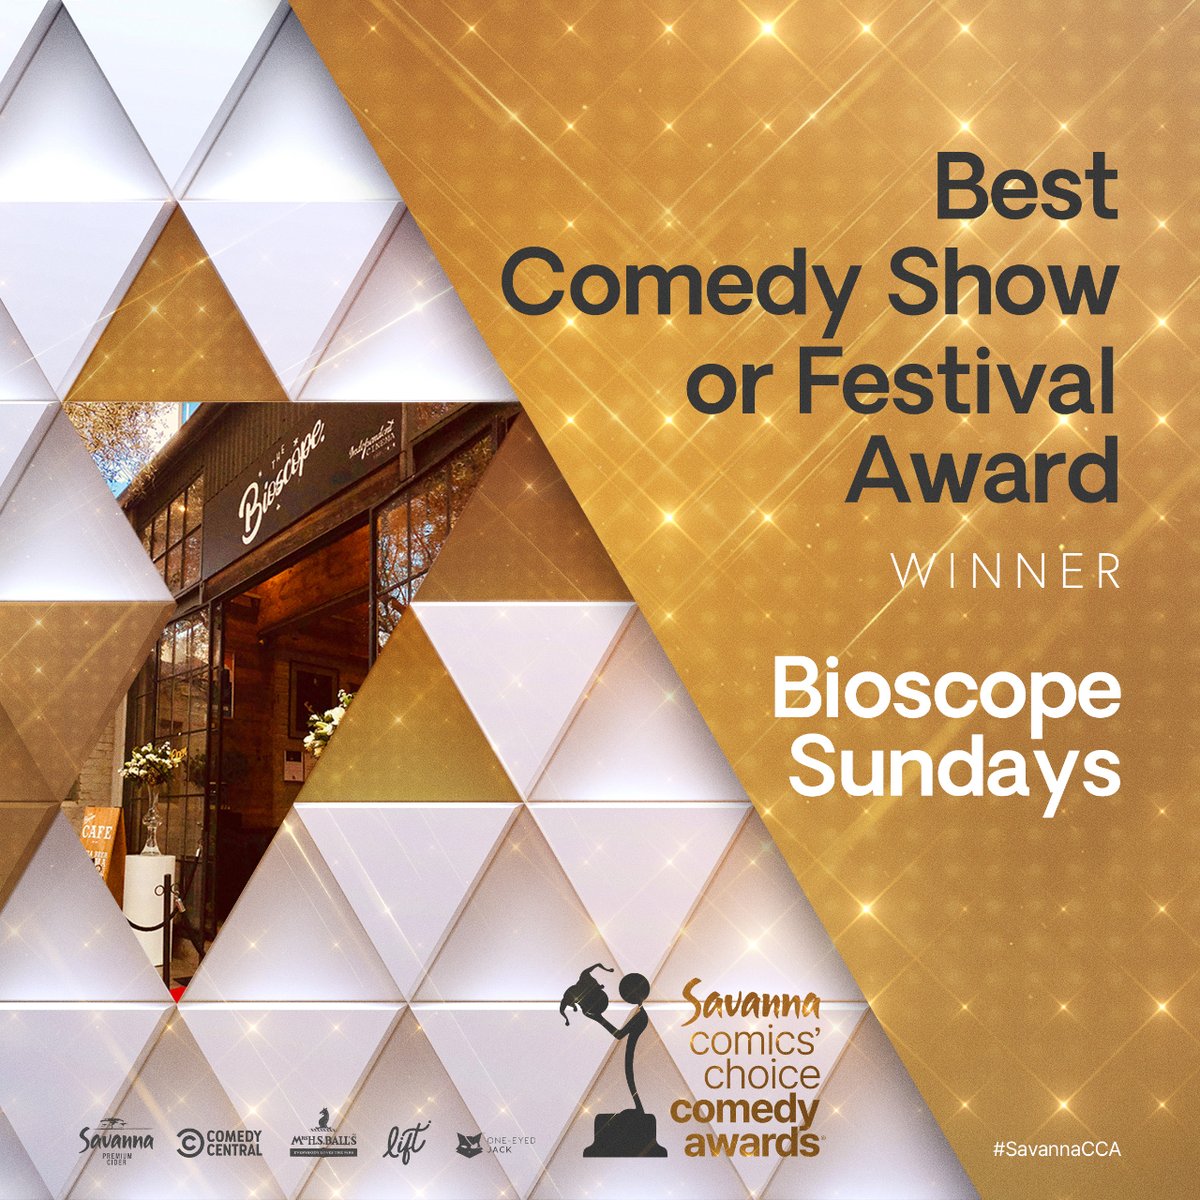 Drumroll, please! 

We've got a winner in the house for the Best Comedy Show or Festival Award category! Say hello to Bioscope Sundays the ultimate laughter haven that's kept our funny bones tingling all year long!

#SavannaCCA